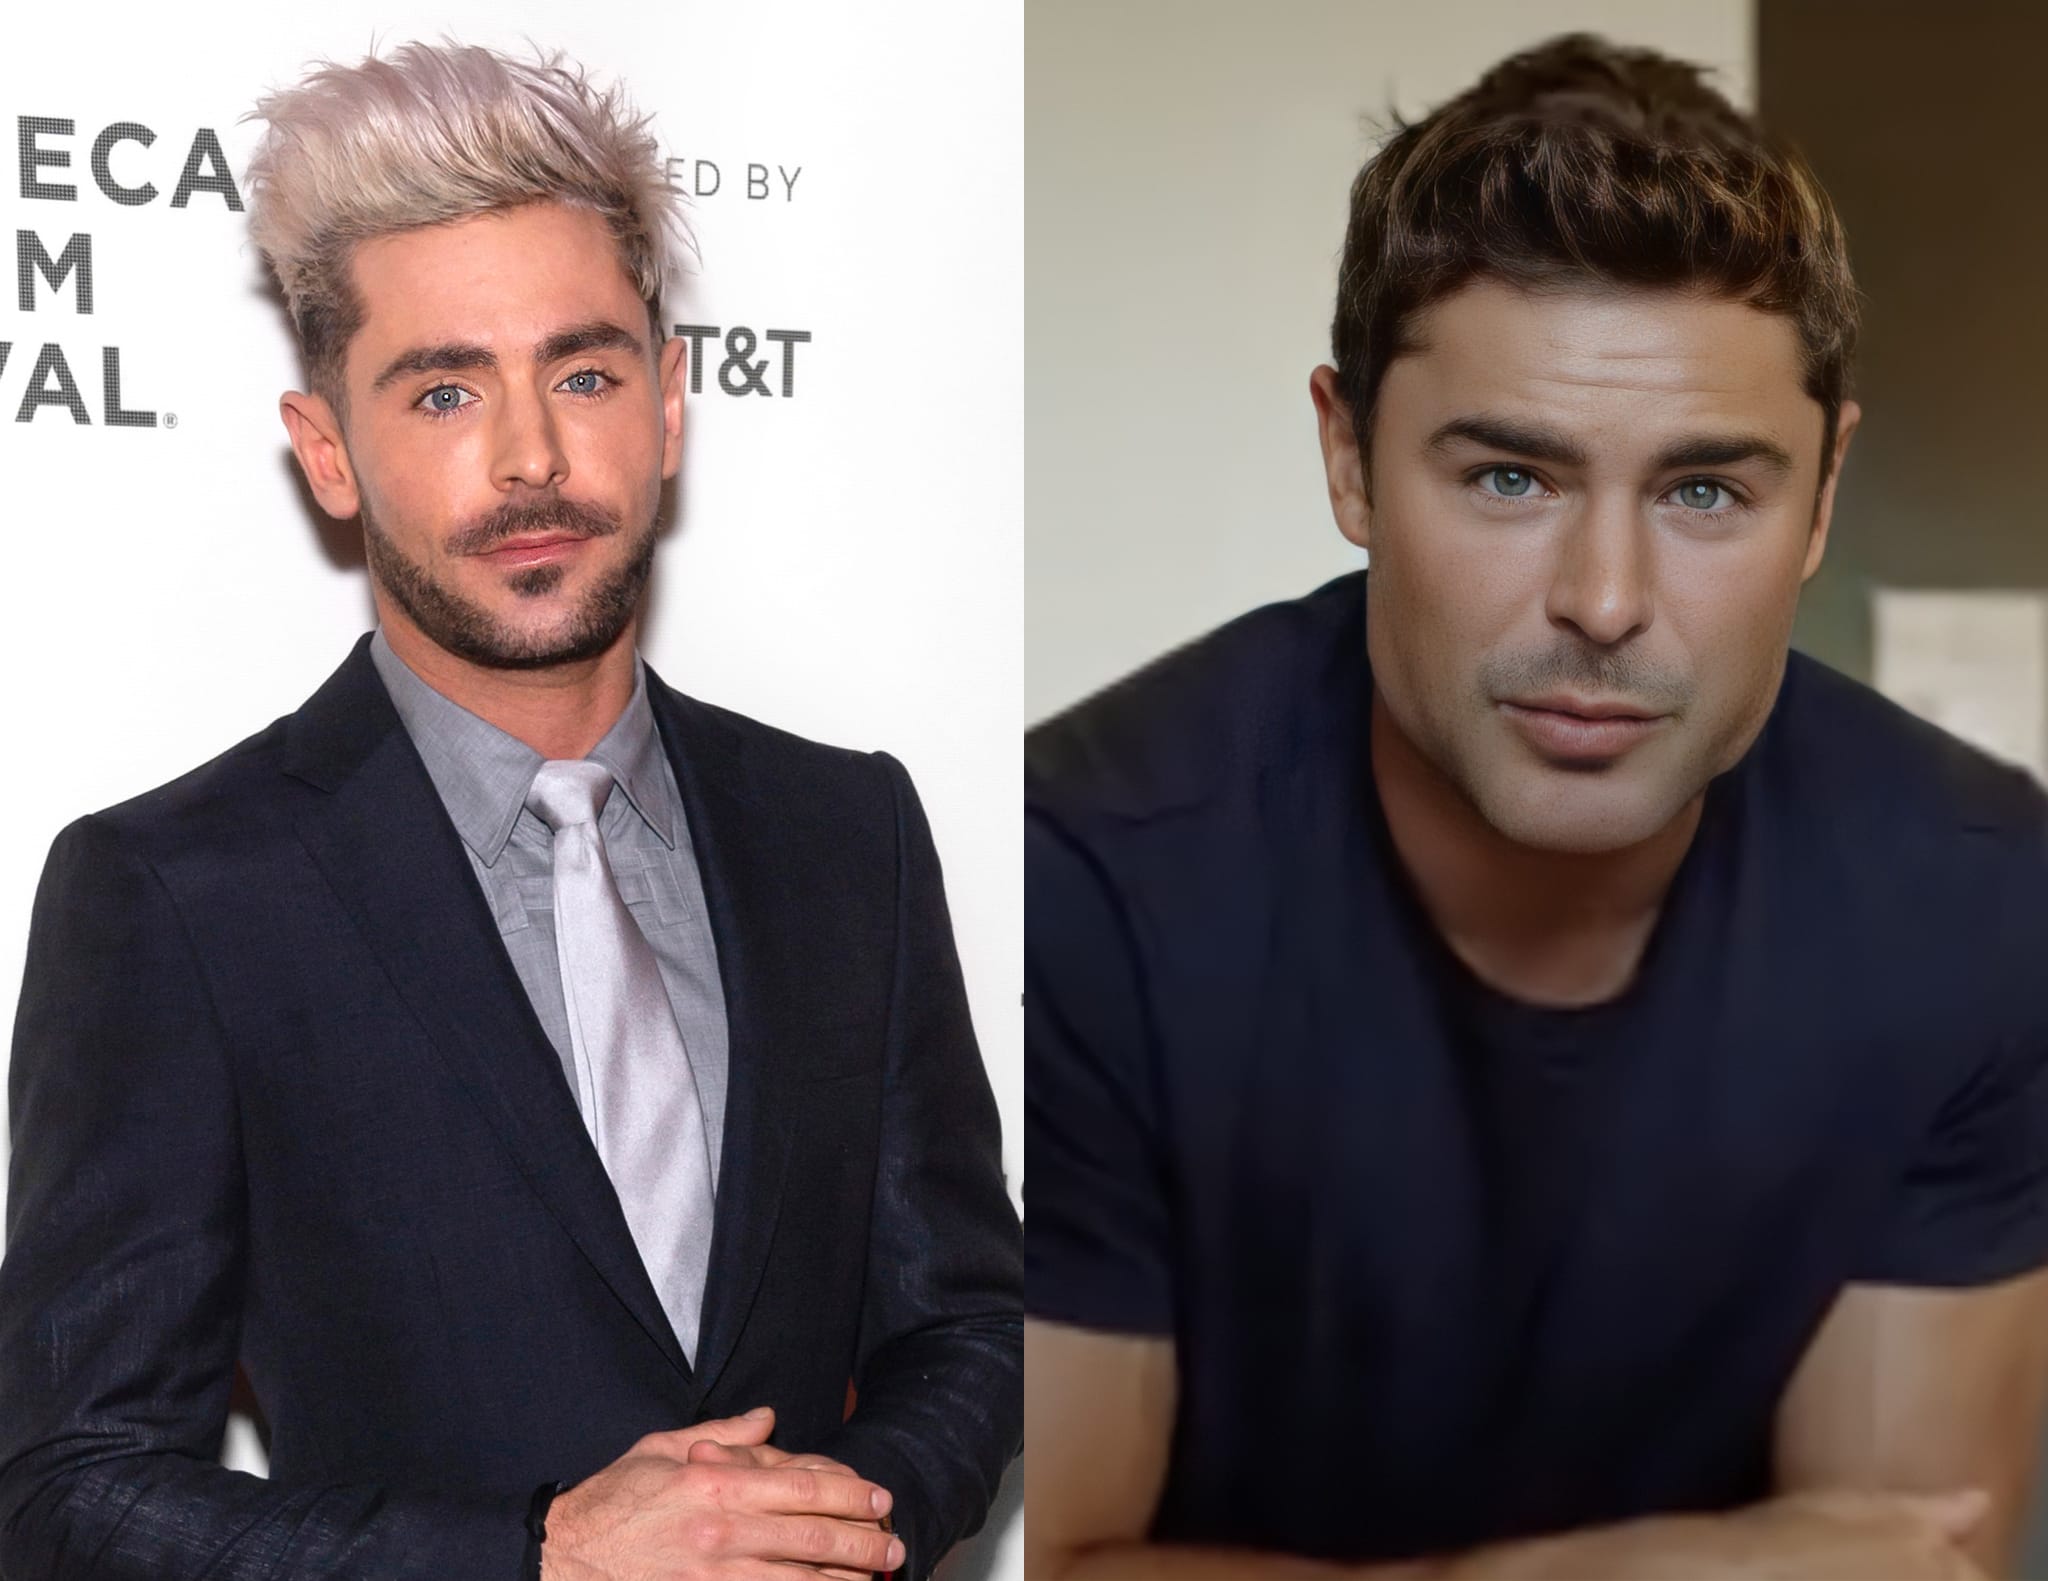 Zac Efron, in 2019 (L) and 2021 (R), had an unfortunate accident that reportedly broke his jaw in 2013